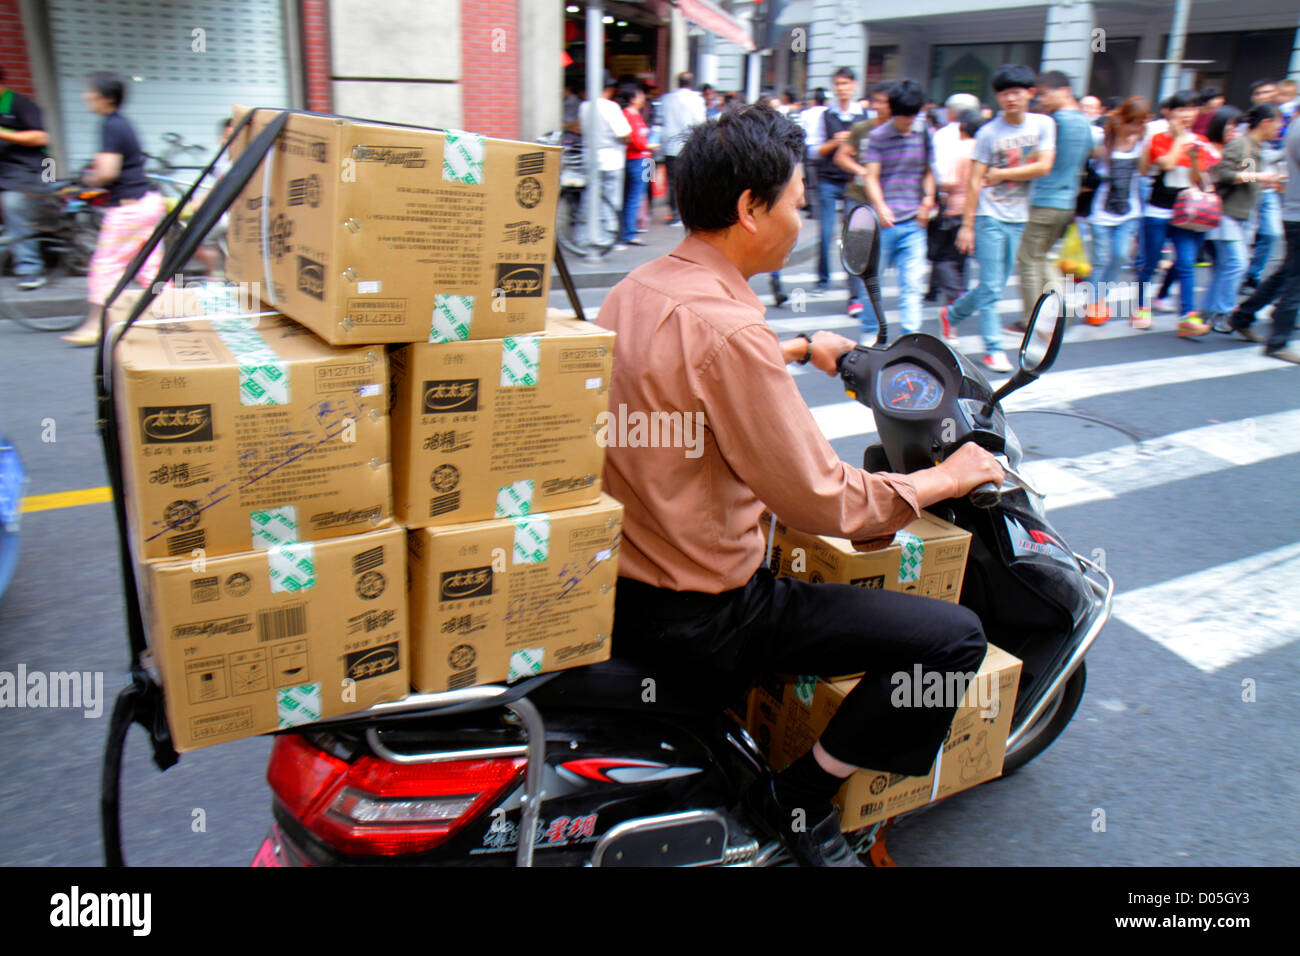 Shanghai China,Chinese Huangpu District,East Nanjing Road,National Day Golden Week,Asian man men male adult adults,street scene,motor scooter,boxes,de Stock Photo